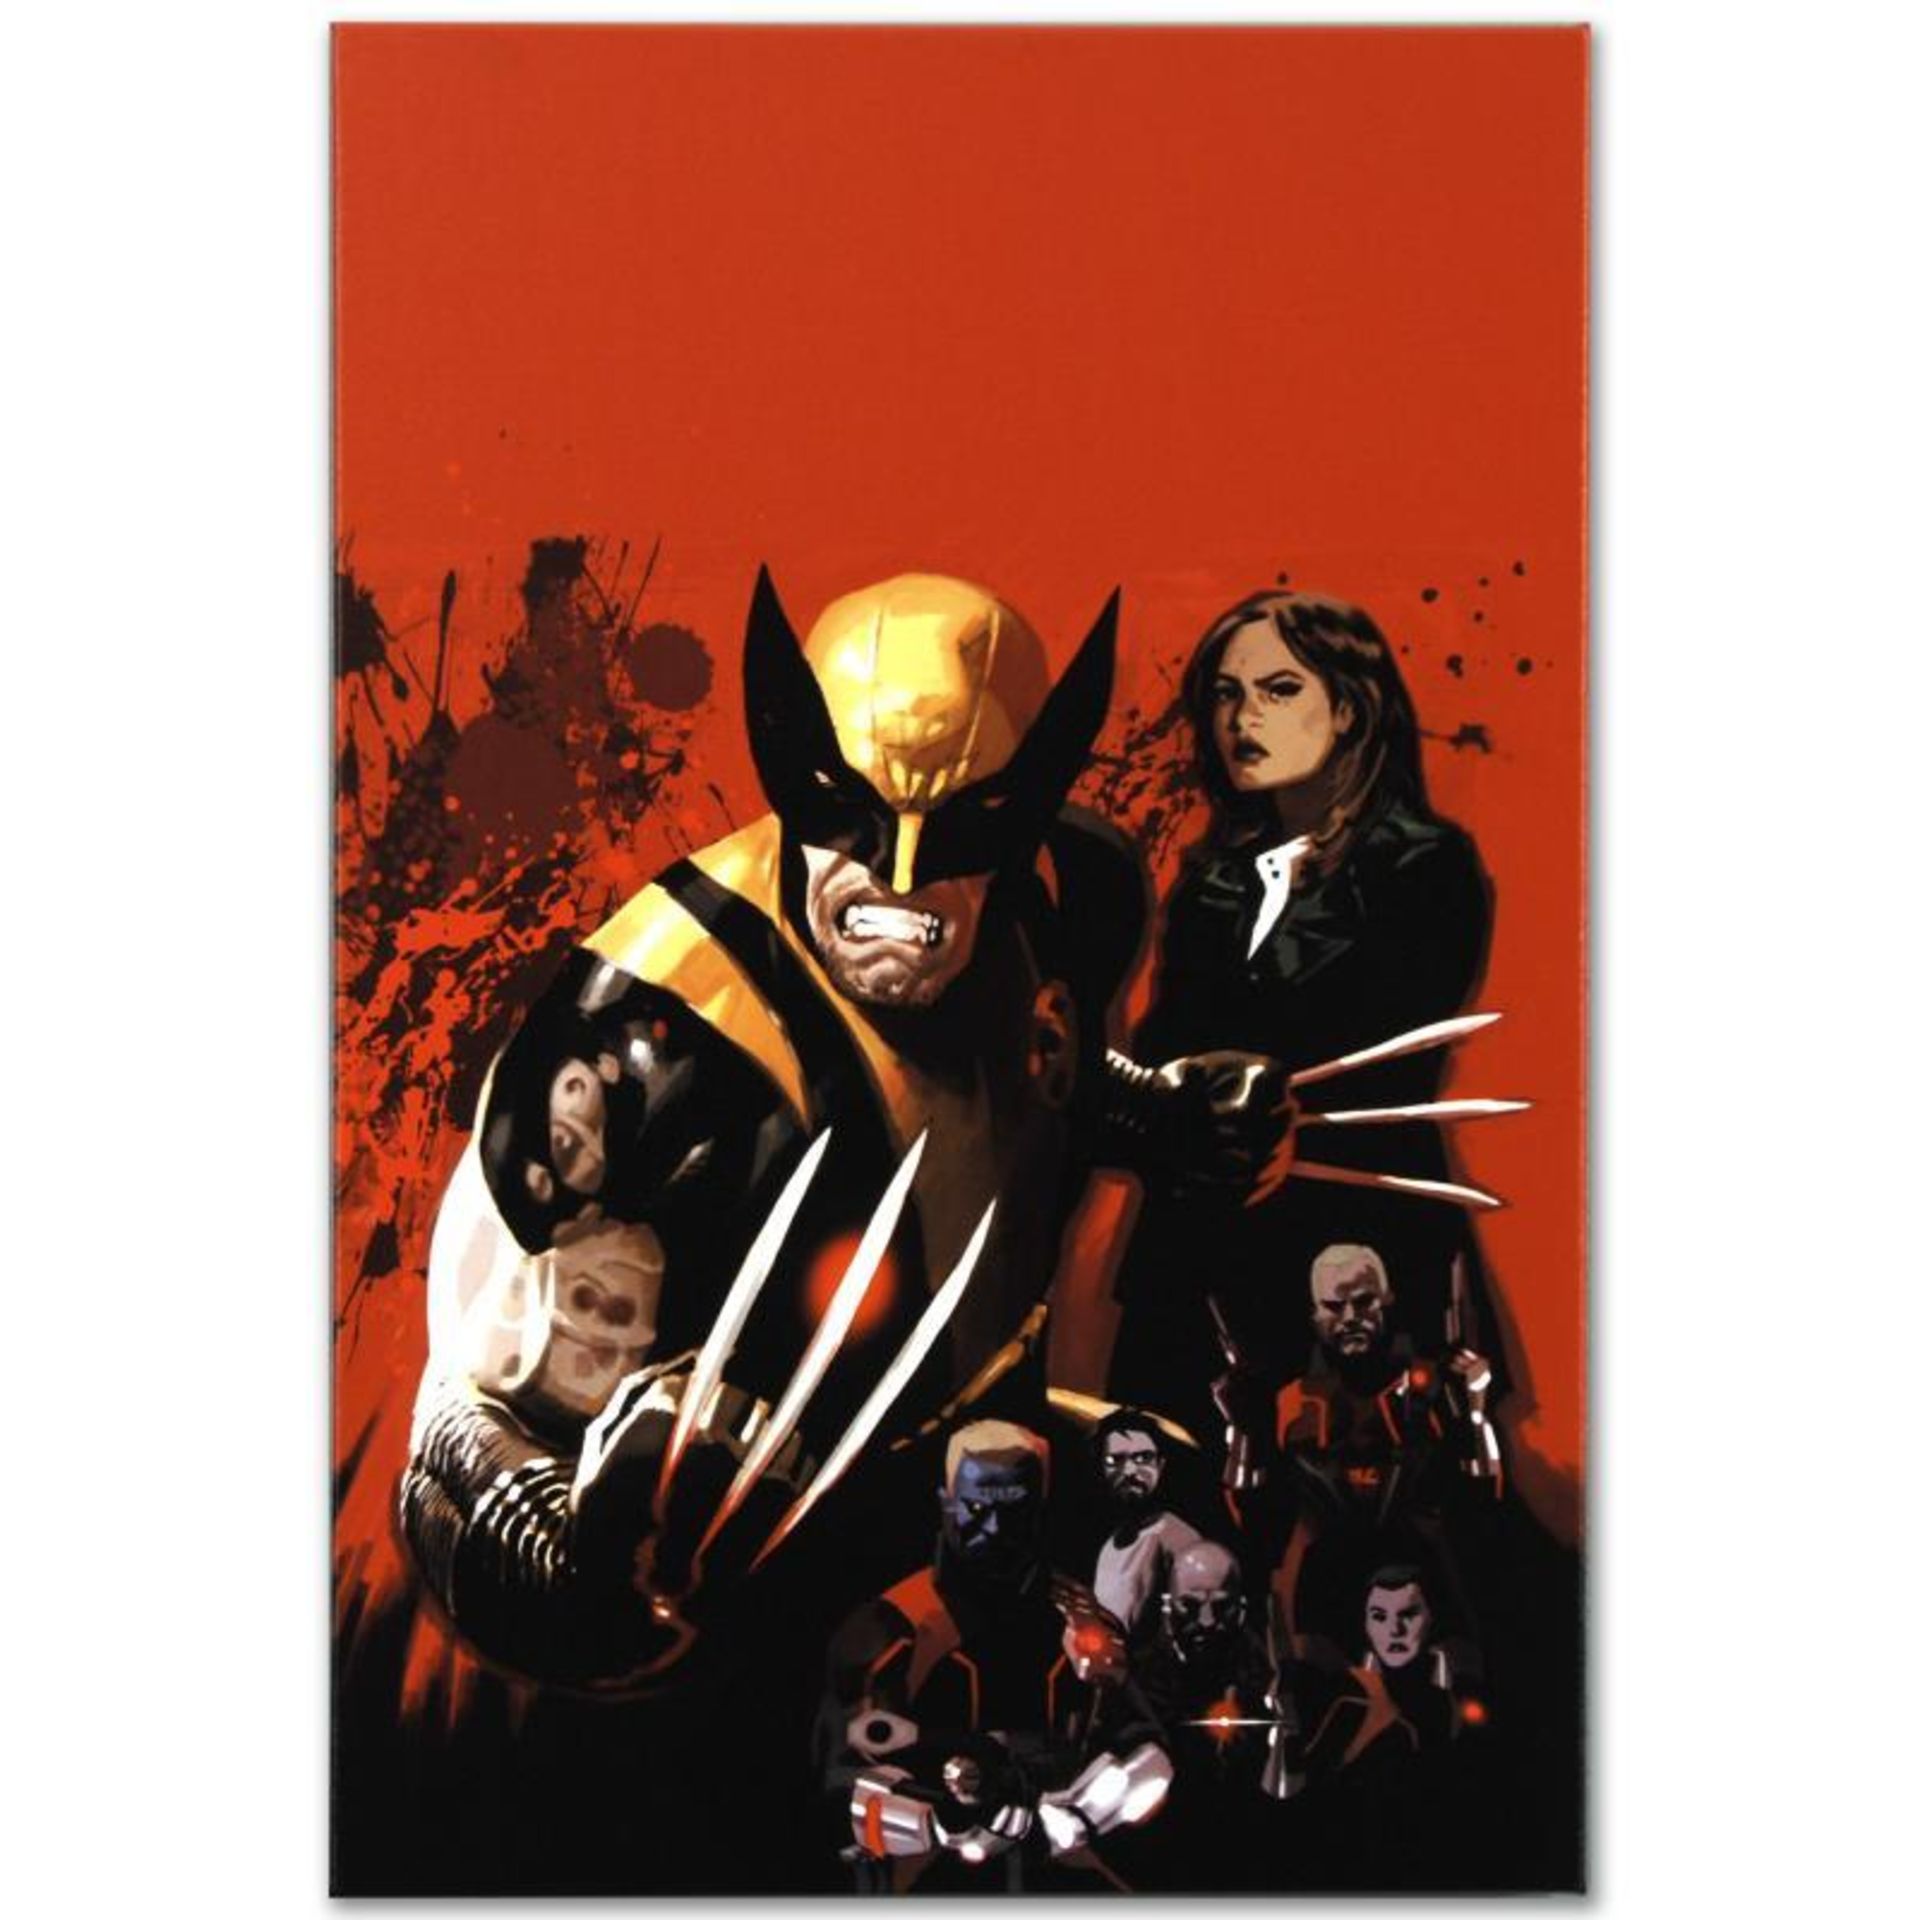 Marvel Comics "Fear Itself: Wolverine #1" Numbered Limited Edition Giclee on Can